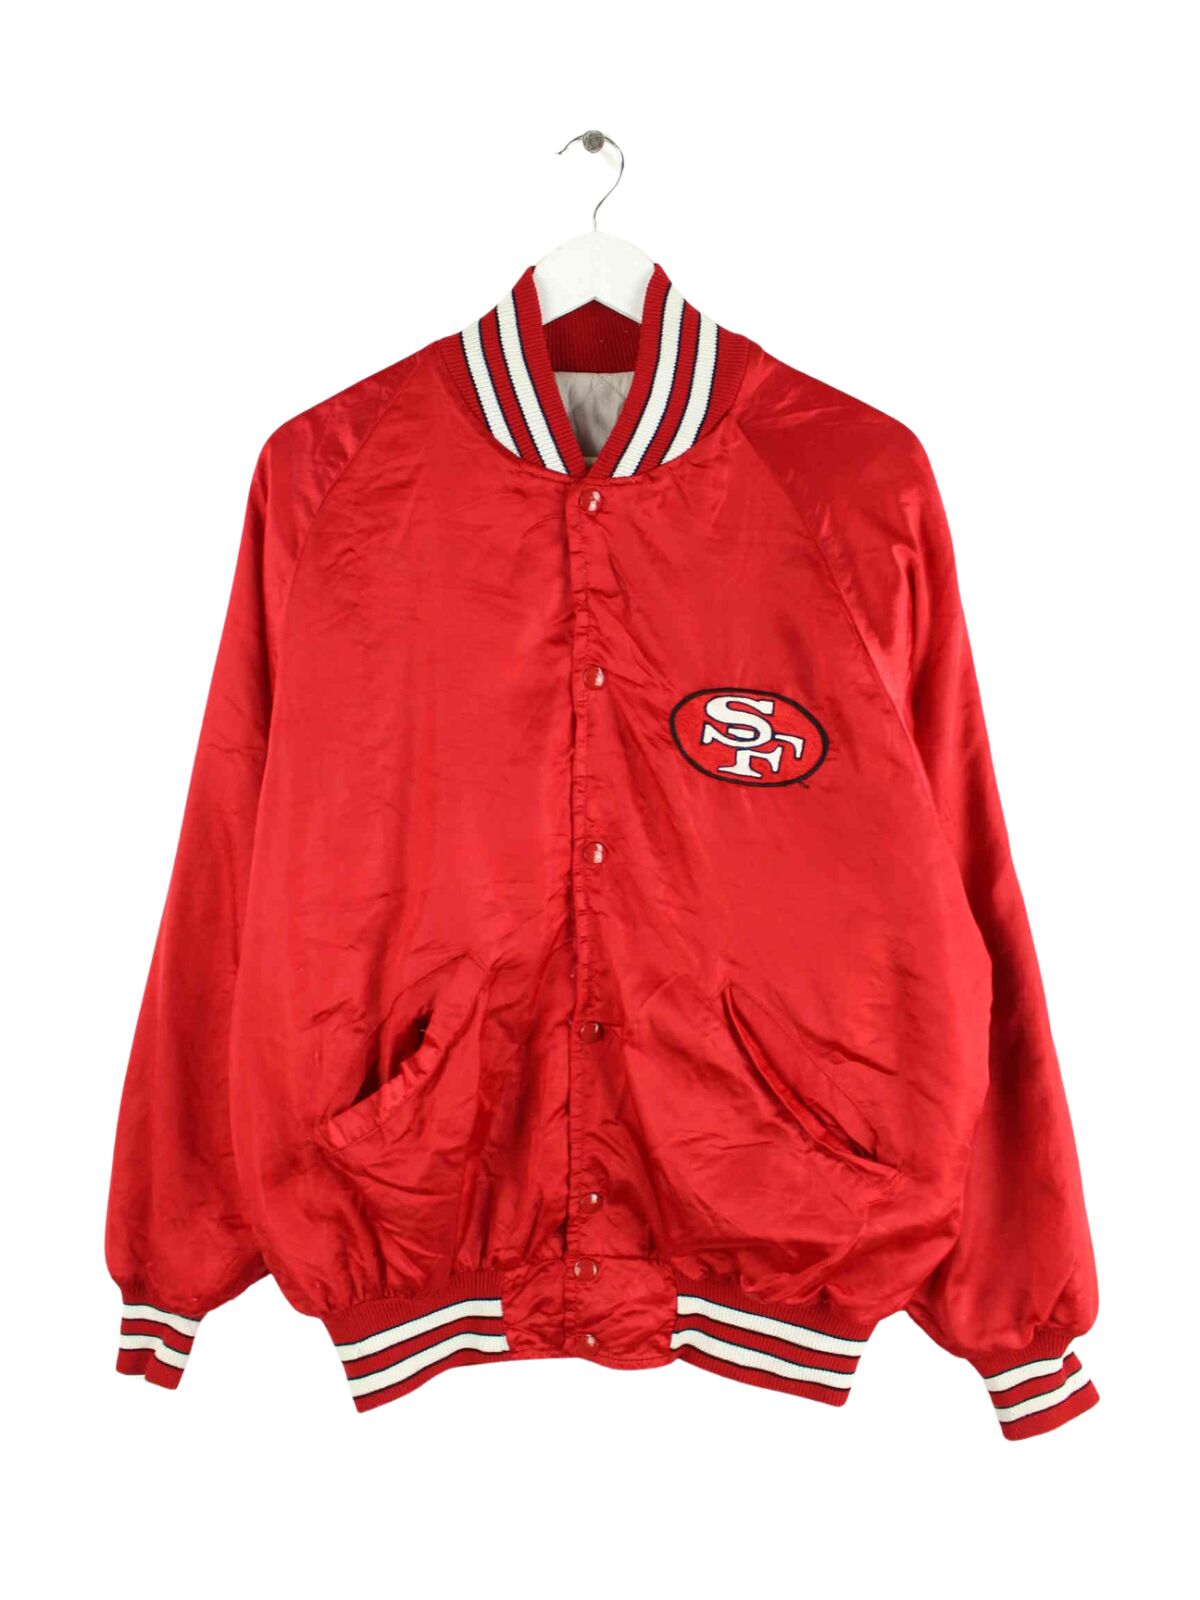 Vintage 80s San Francisco 49ers Embroidered Jacke Rot M (front image)